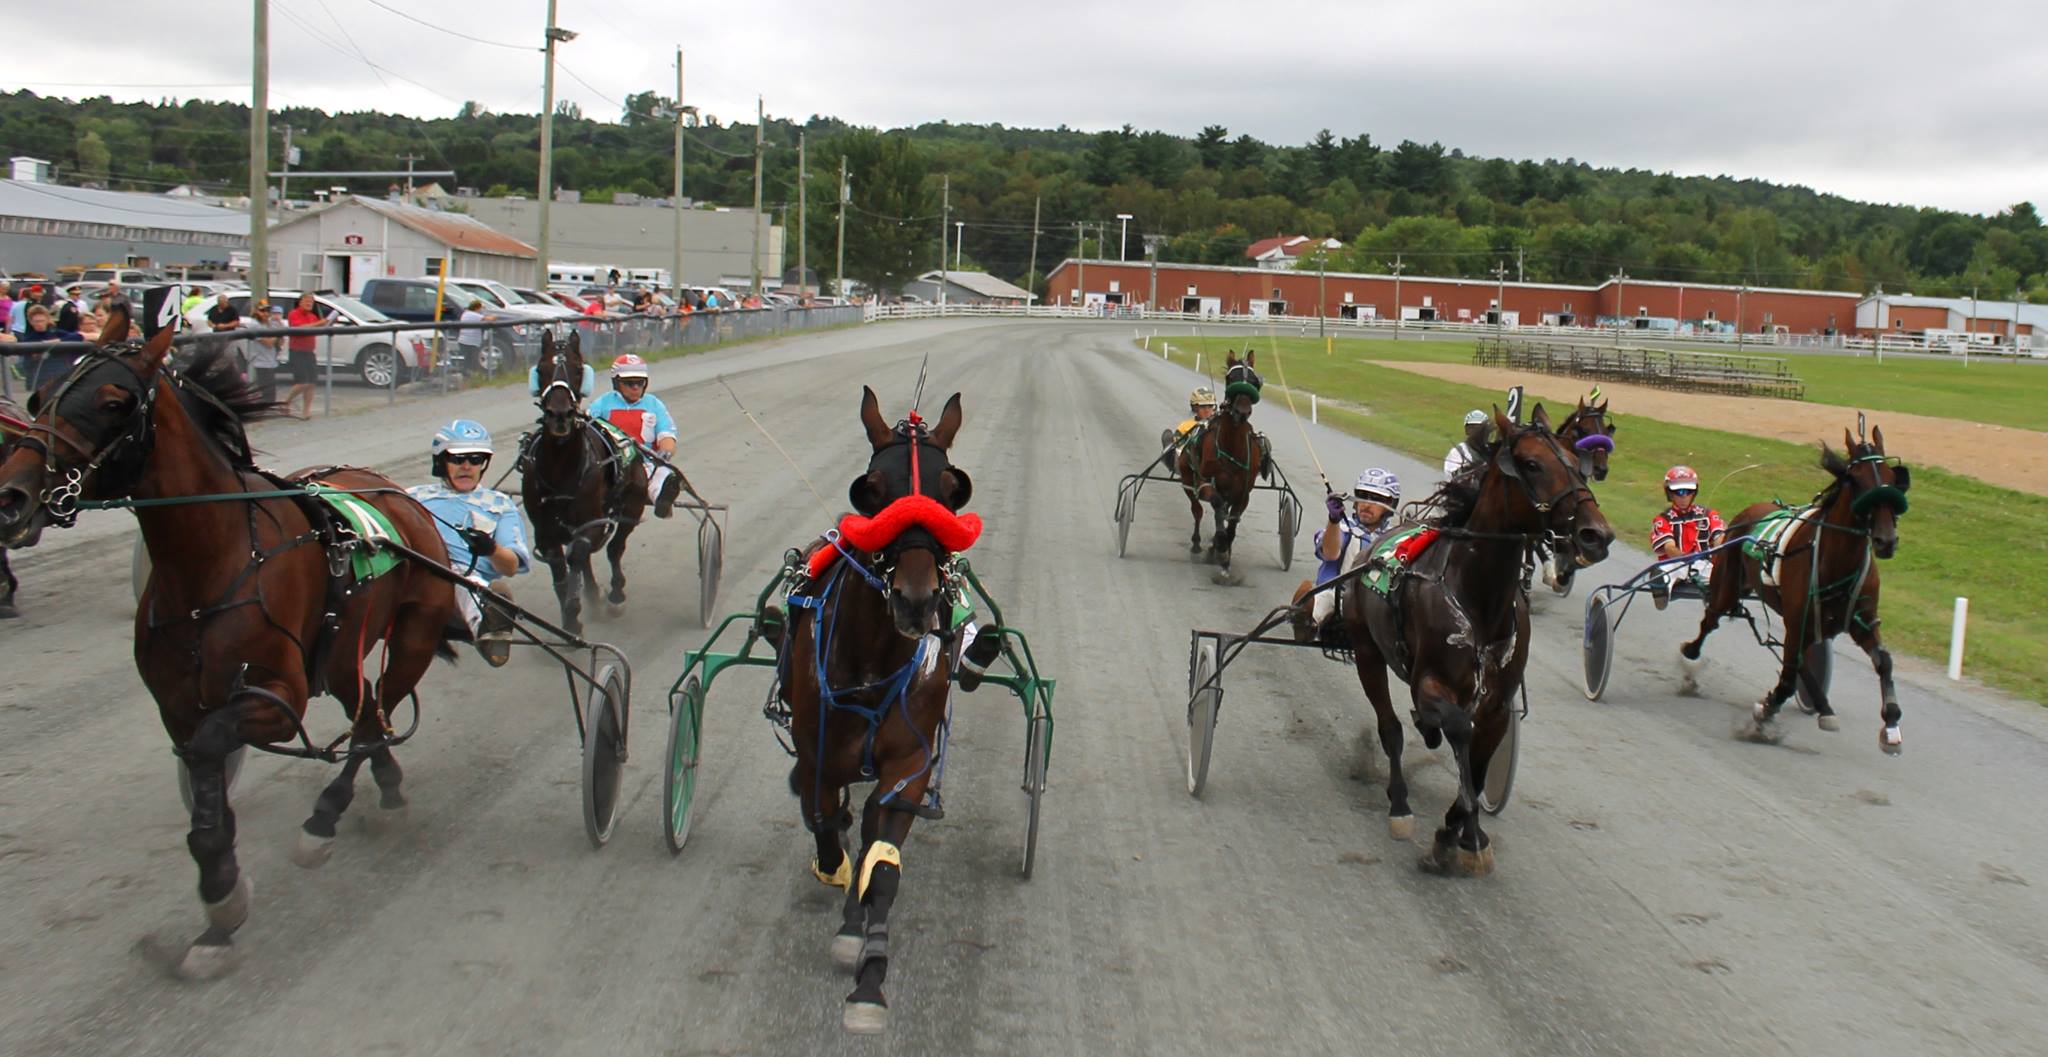 Fredericton to permanently disallow horse racing on exhibition grounds